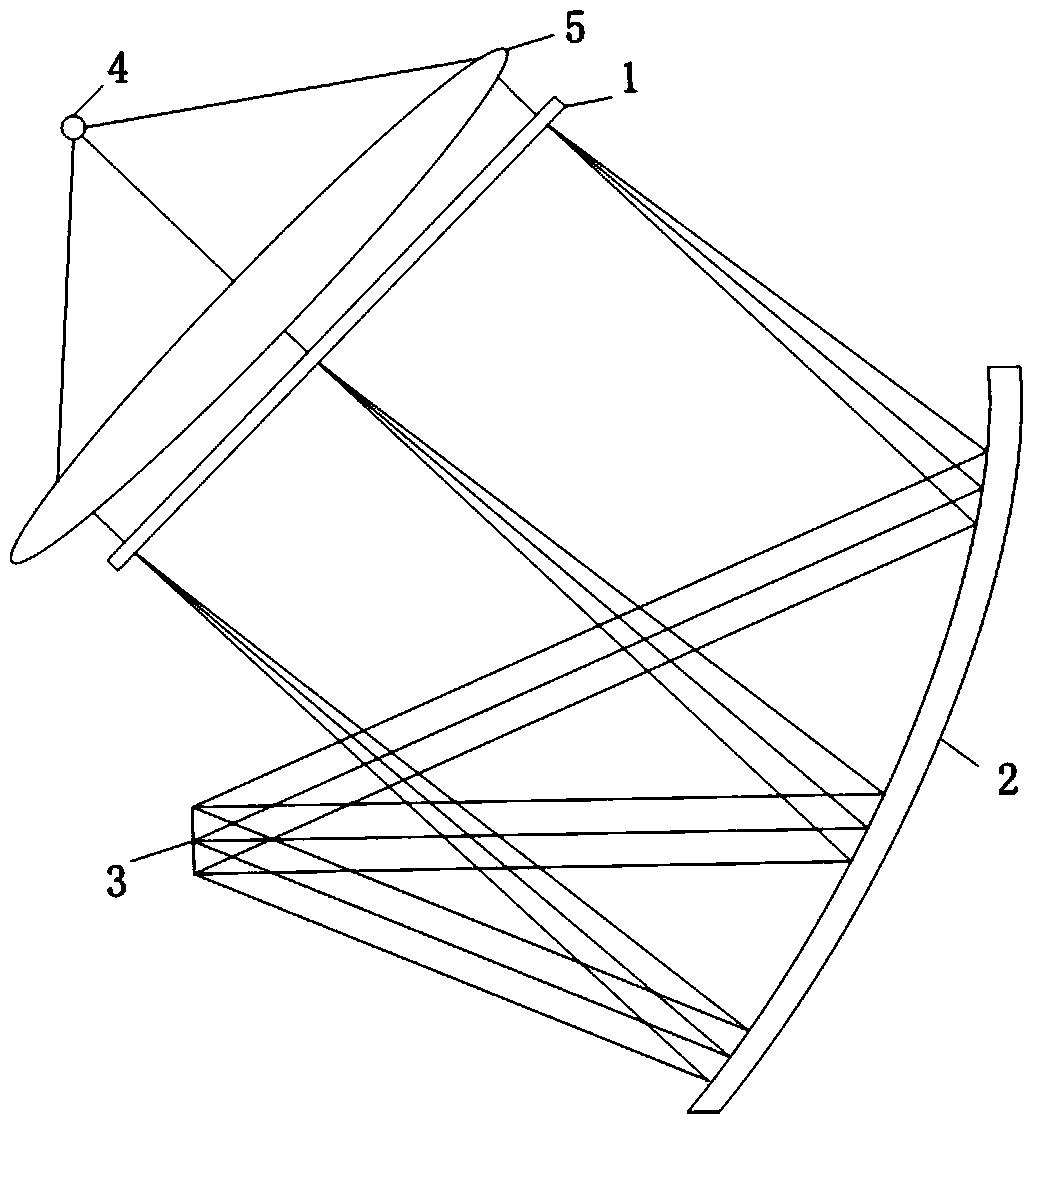 Head-mounted 3D display device